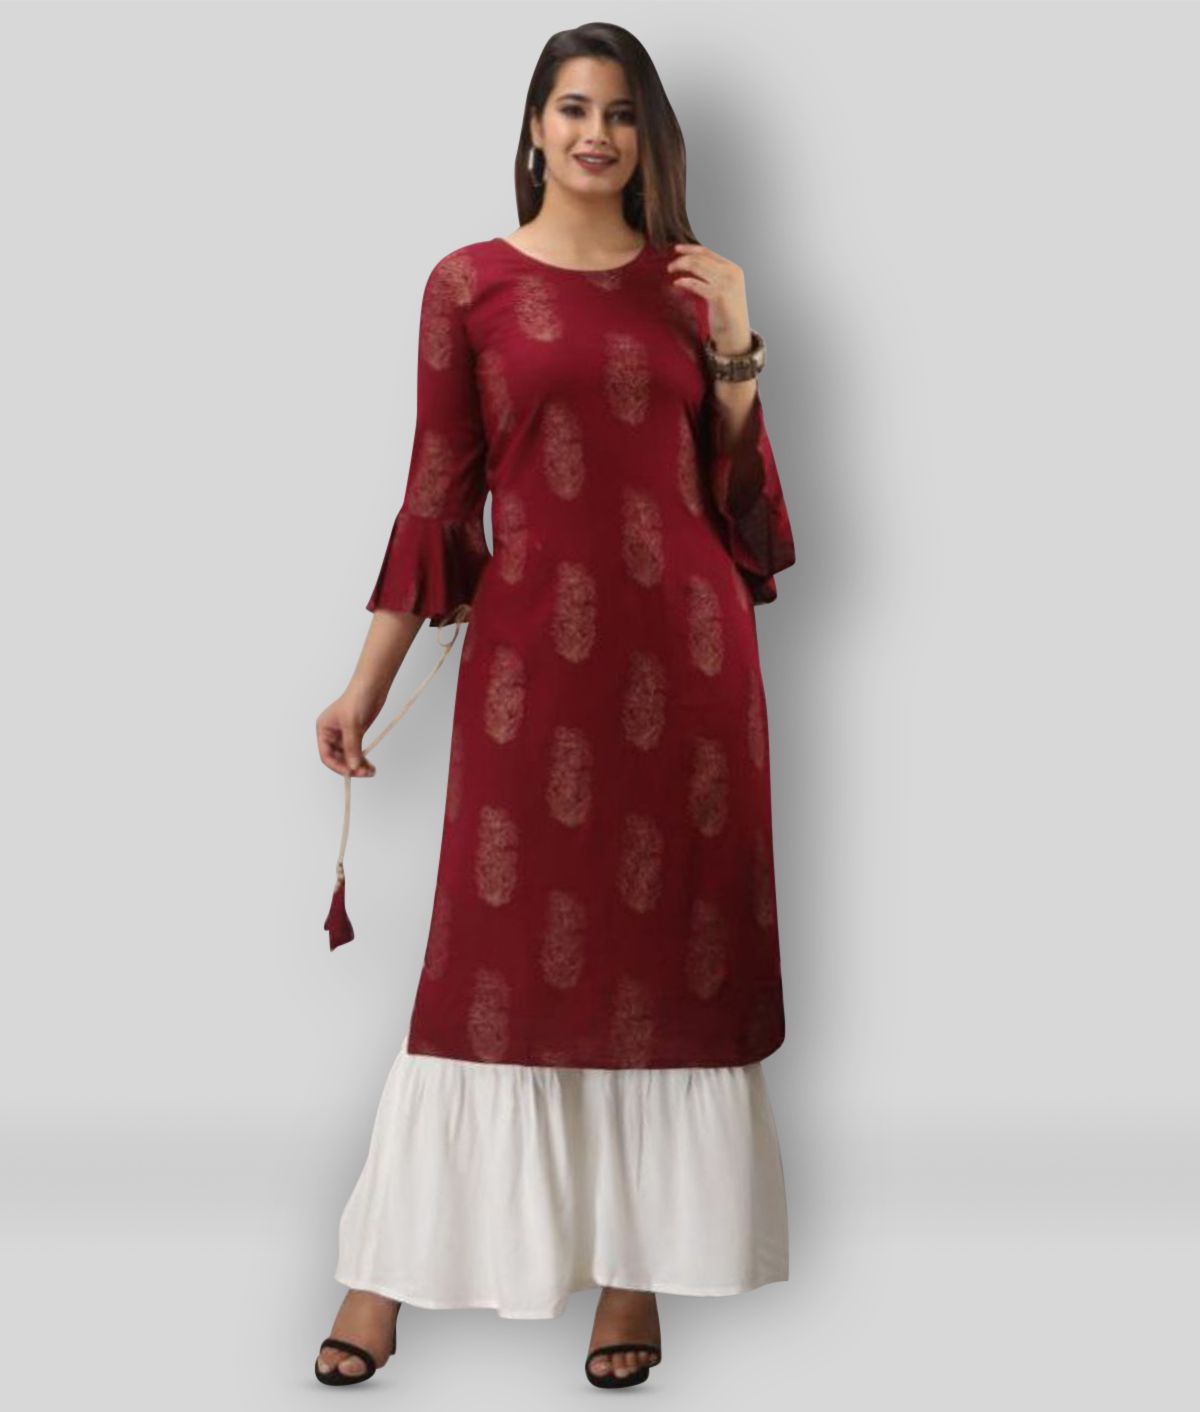     			MAUKA - Maroon Straight Rayon Women's Stitched Salwar Suit ( Pack of 1 )